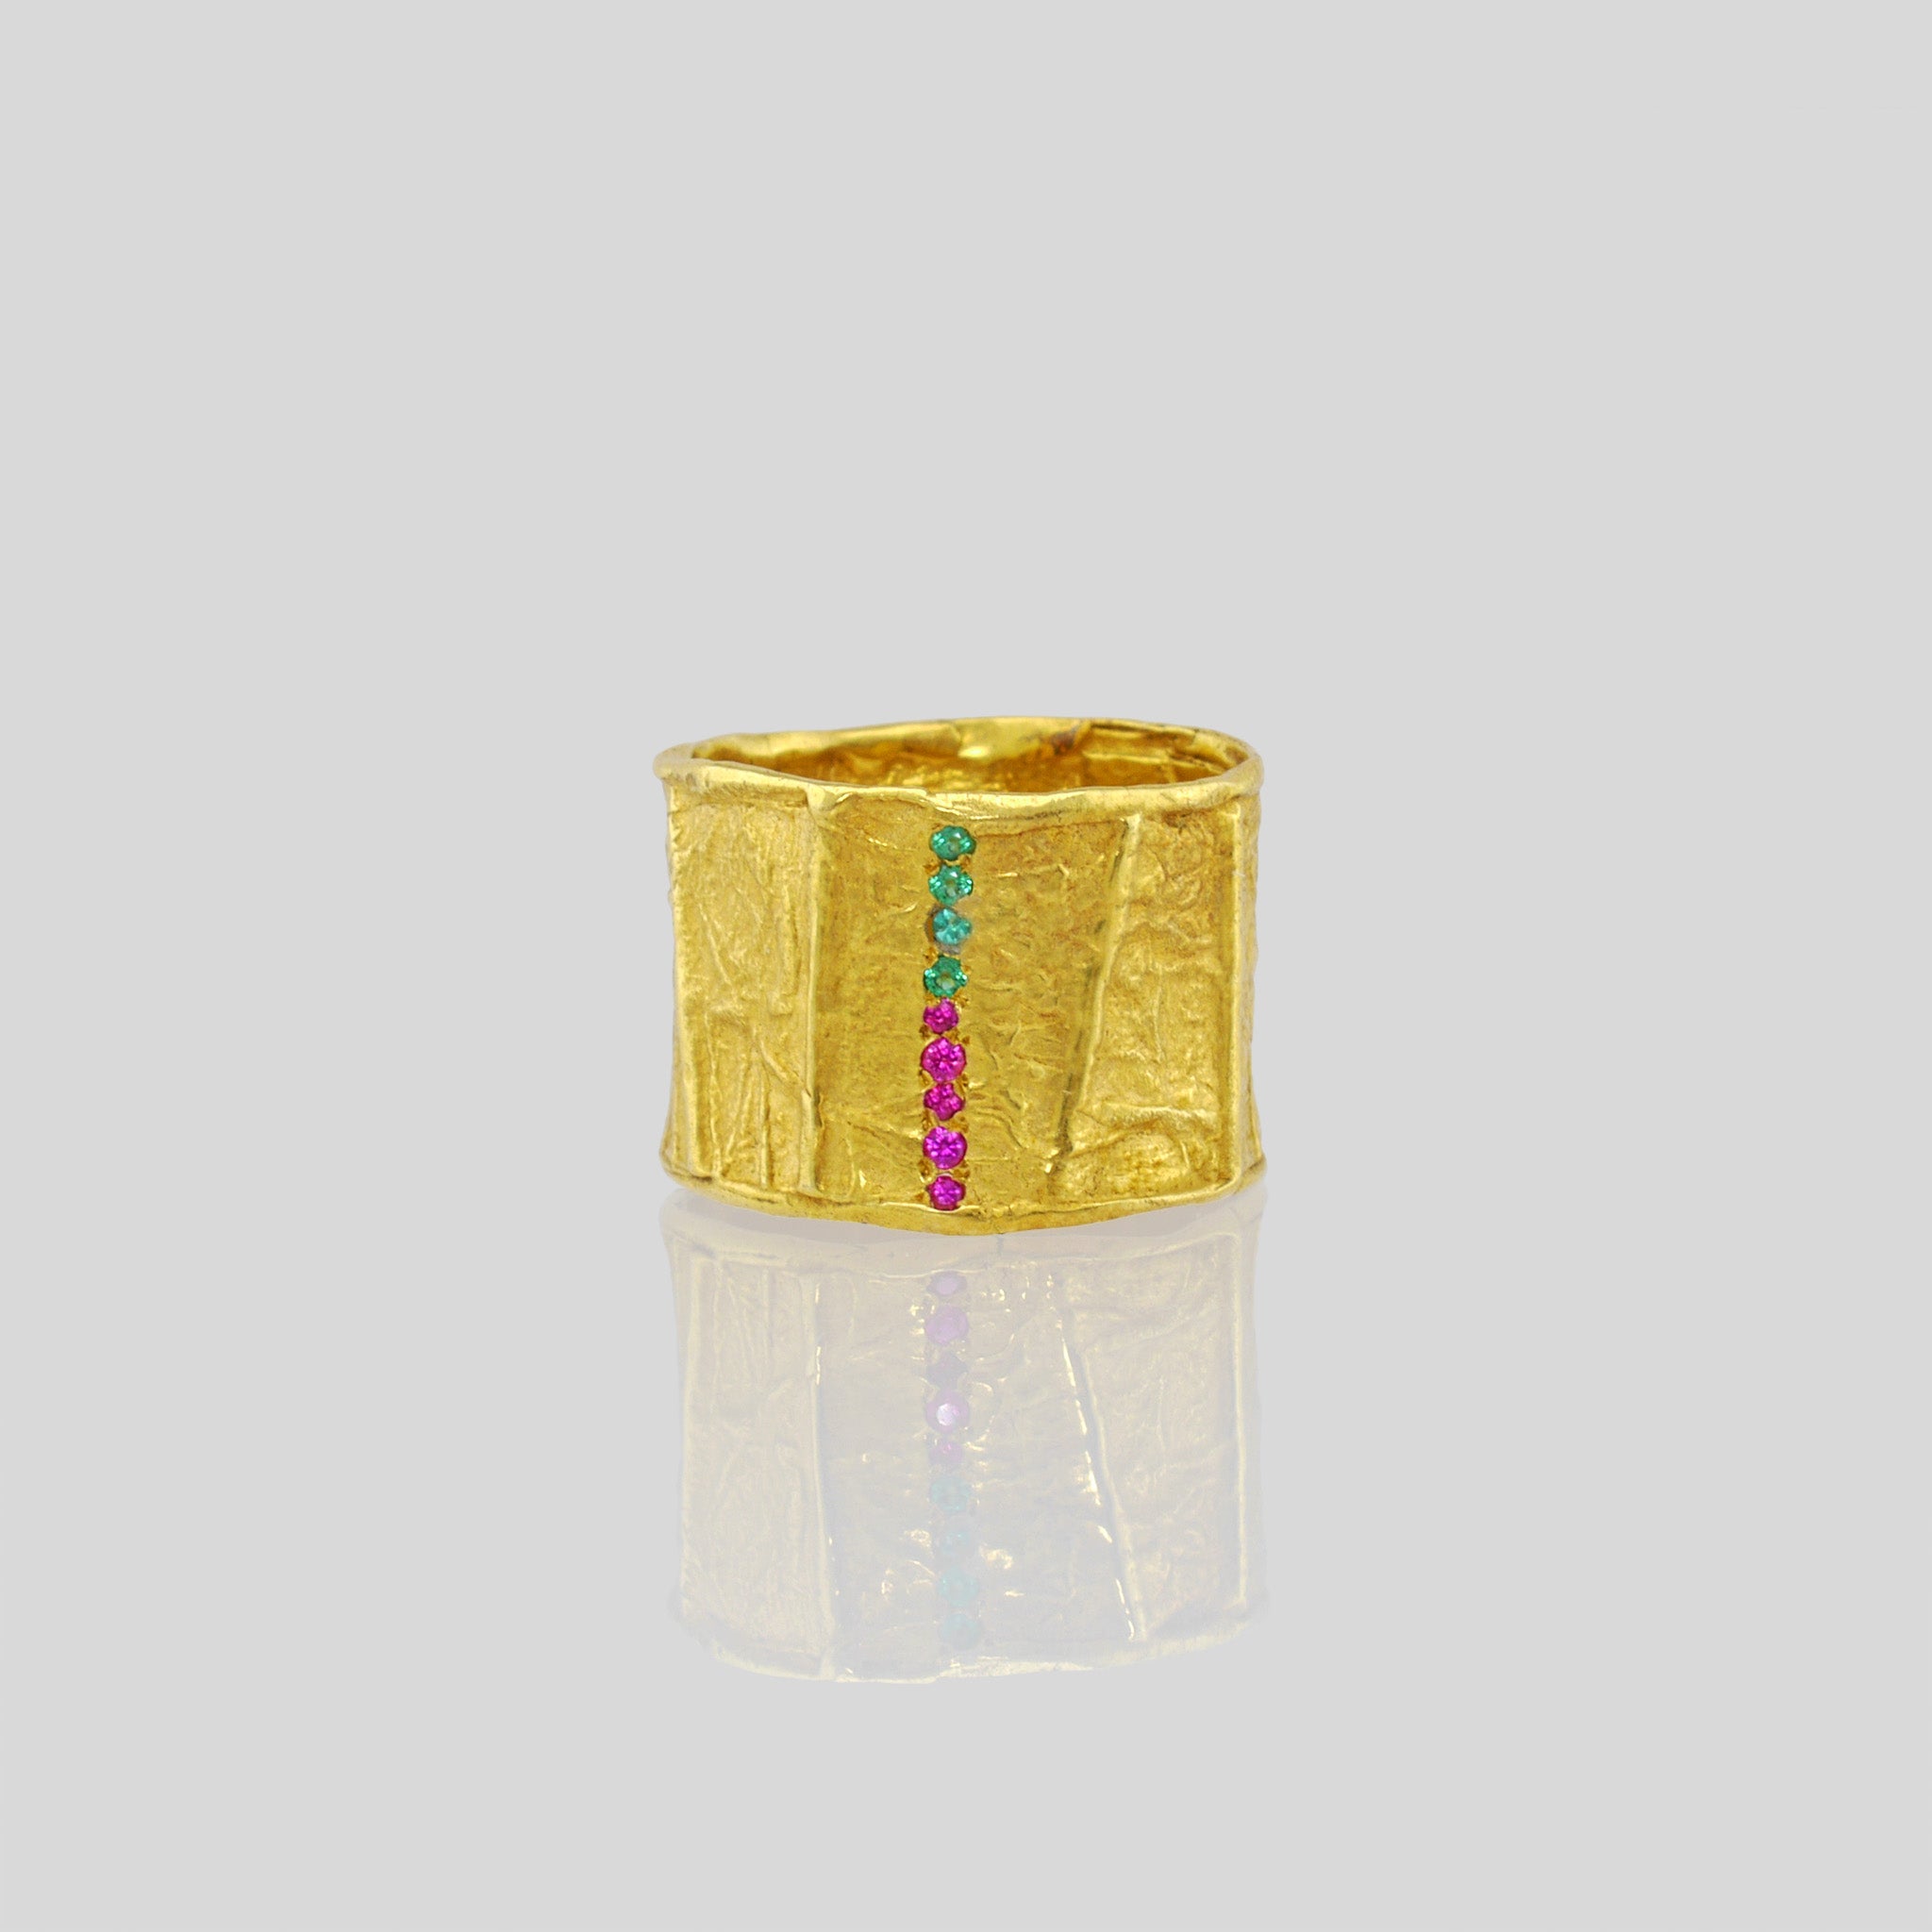 Handcrafted gold ring featuring a wide band with a distinct textured surface achieved through Kami's paper modeling technique. Embellished with miniature rubies and emeralds, this ring exudes a one-of-a-kind, magnificent charm.